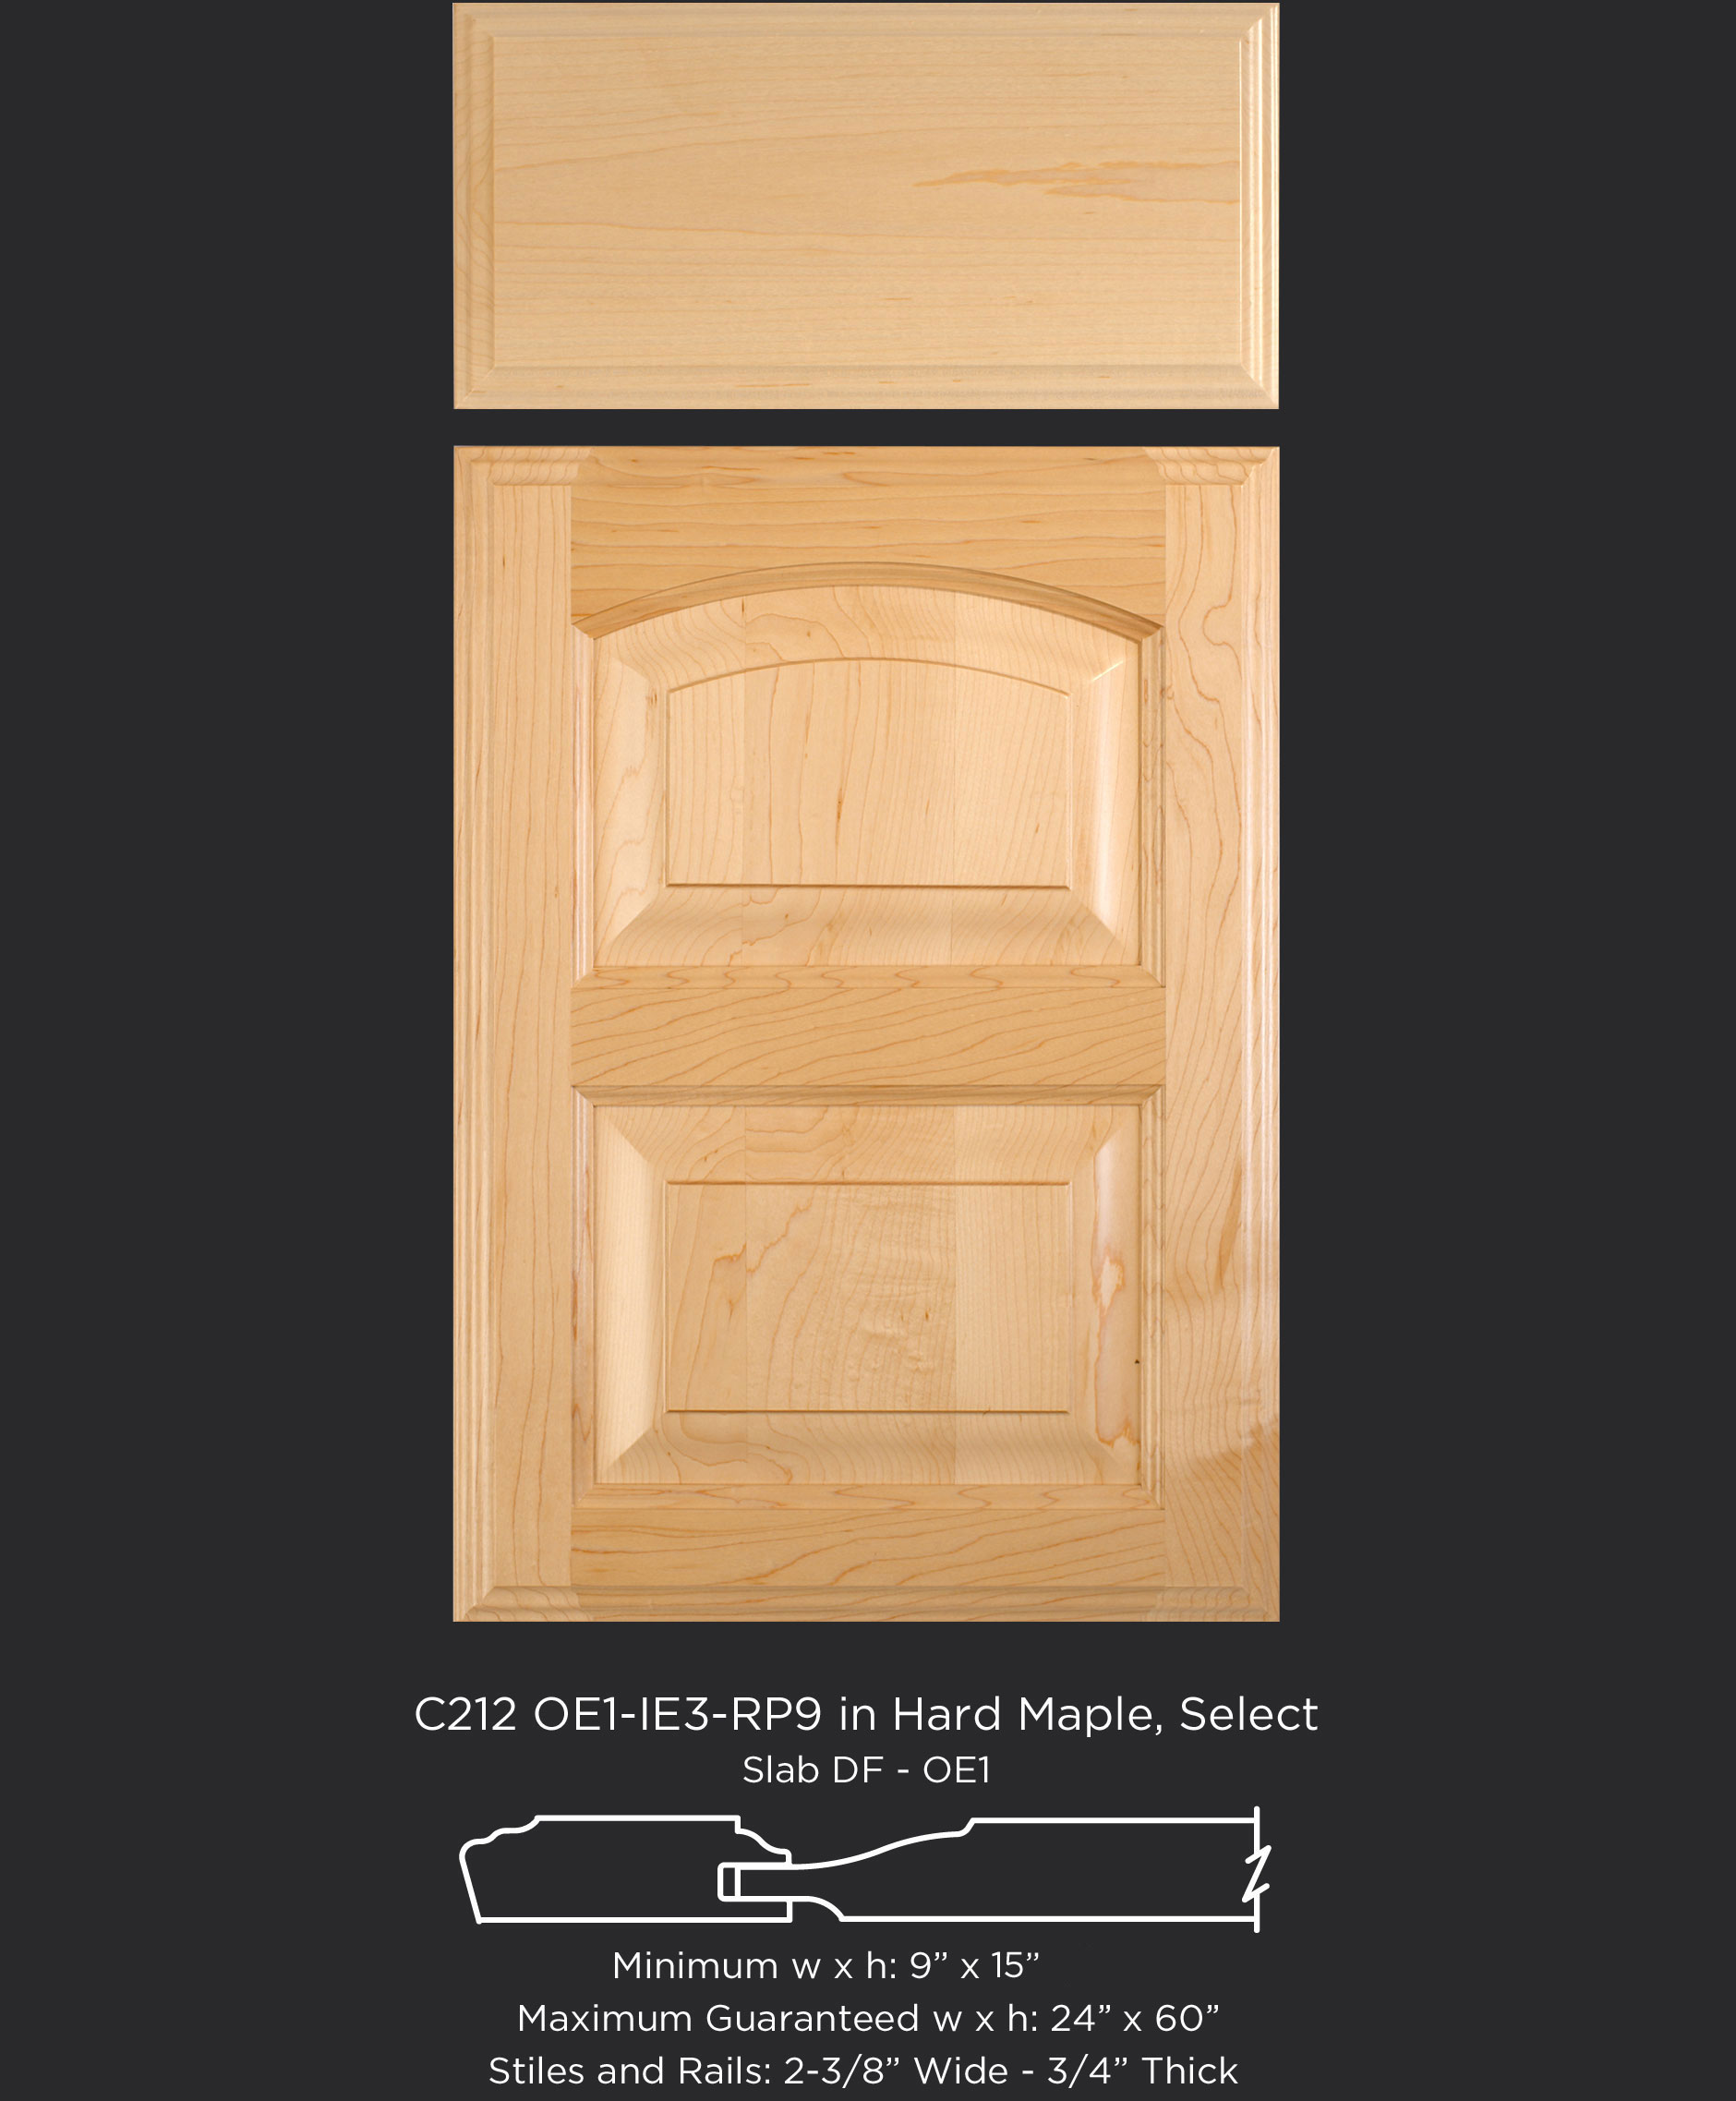 Cope and Stick Cabinet Door C212 OE1-IE3-RP9 in Hard Maple, Select and Slab Drawer Front with OE1